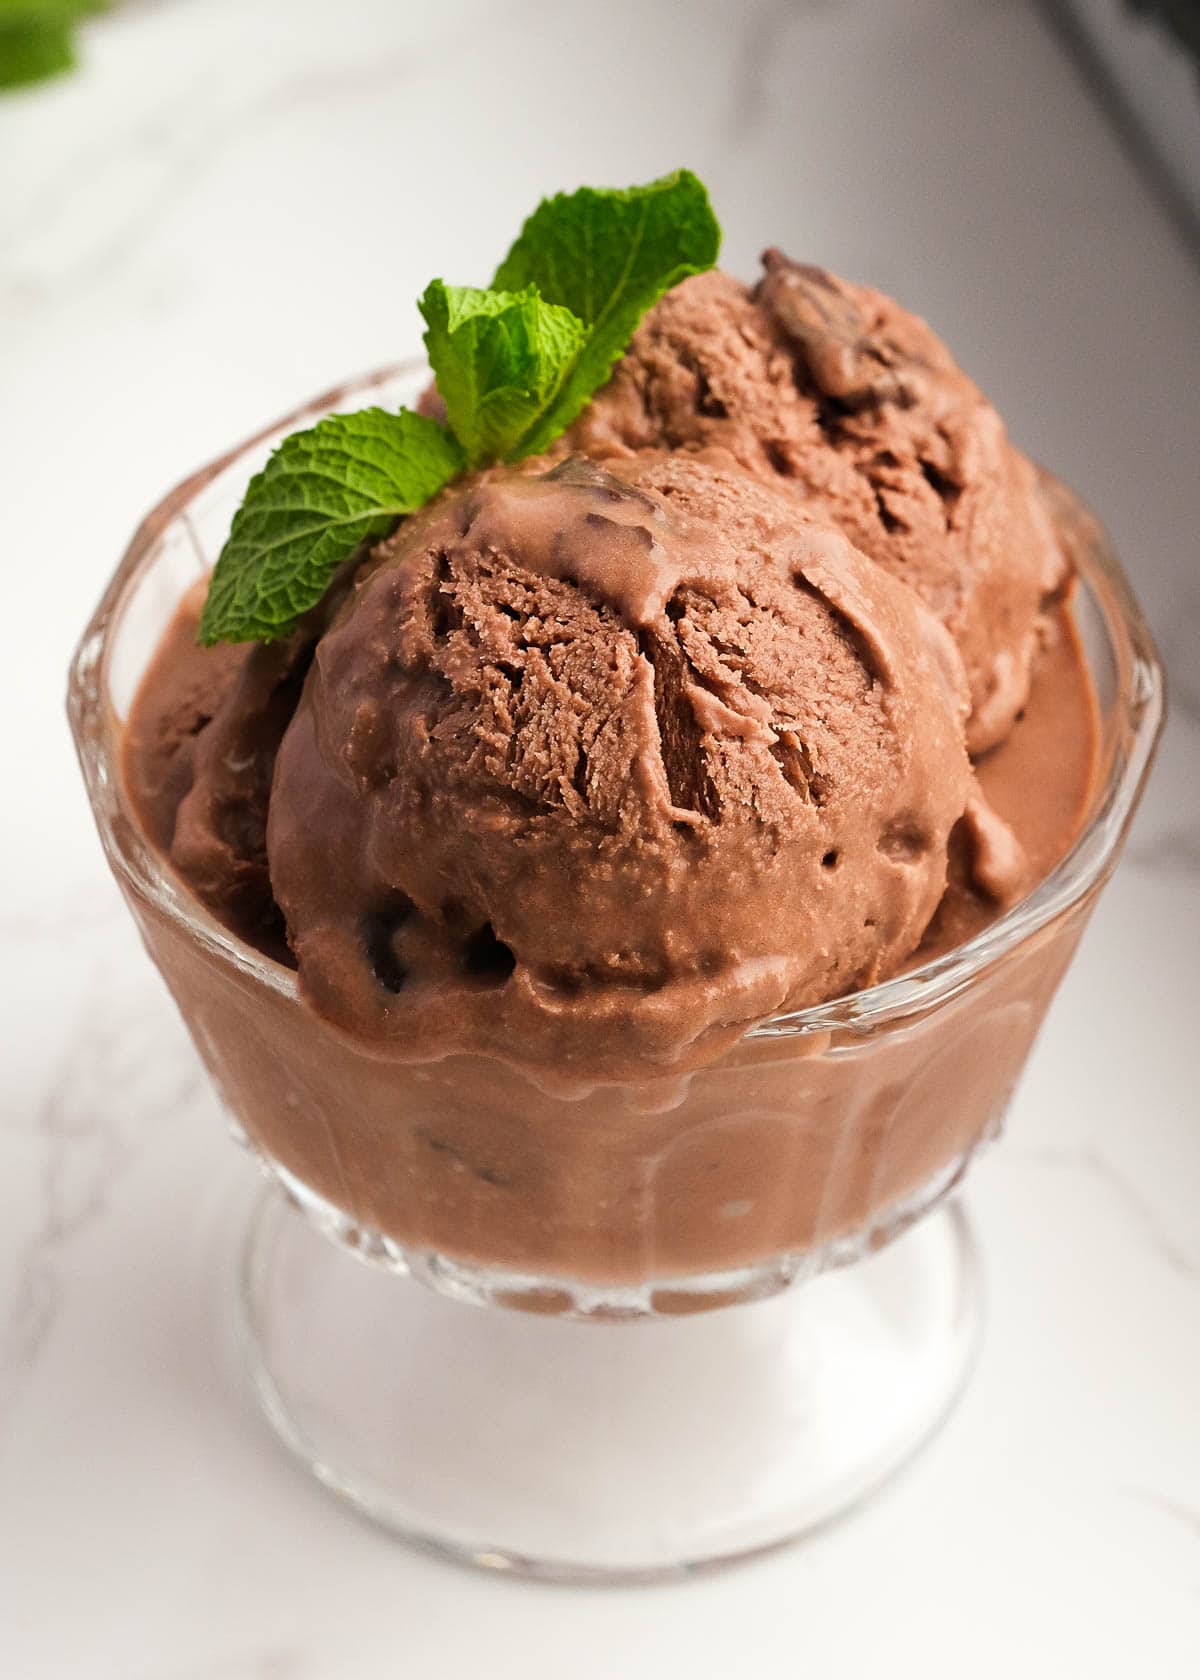 A glass bowl filled with creamy chocolate mint ice cream, garnished with mint leaves